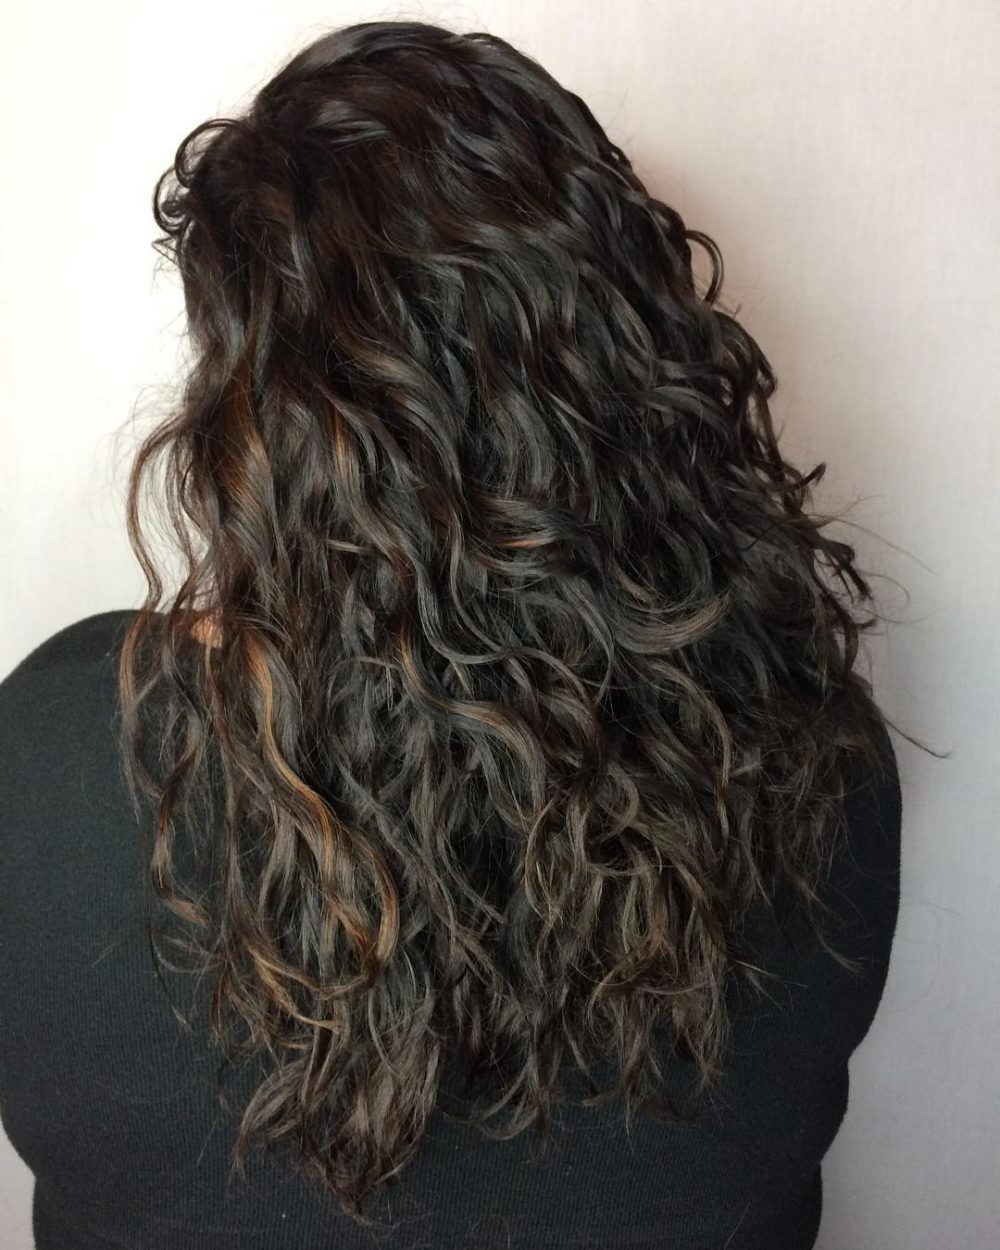 2019 Long Curly Layers Hairstyles Intended For Top 23 Long Curly Hair Ideas Of  (View 1 of 20)